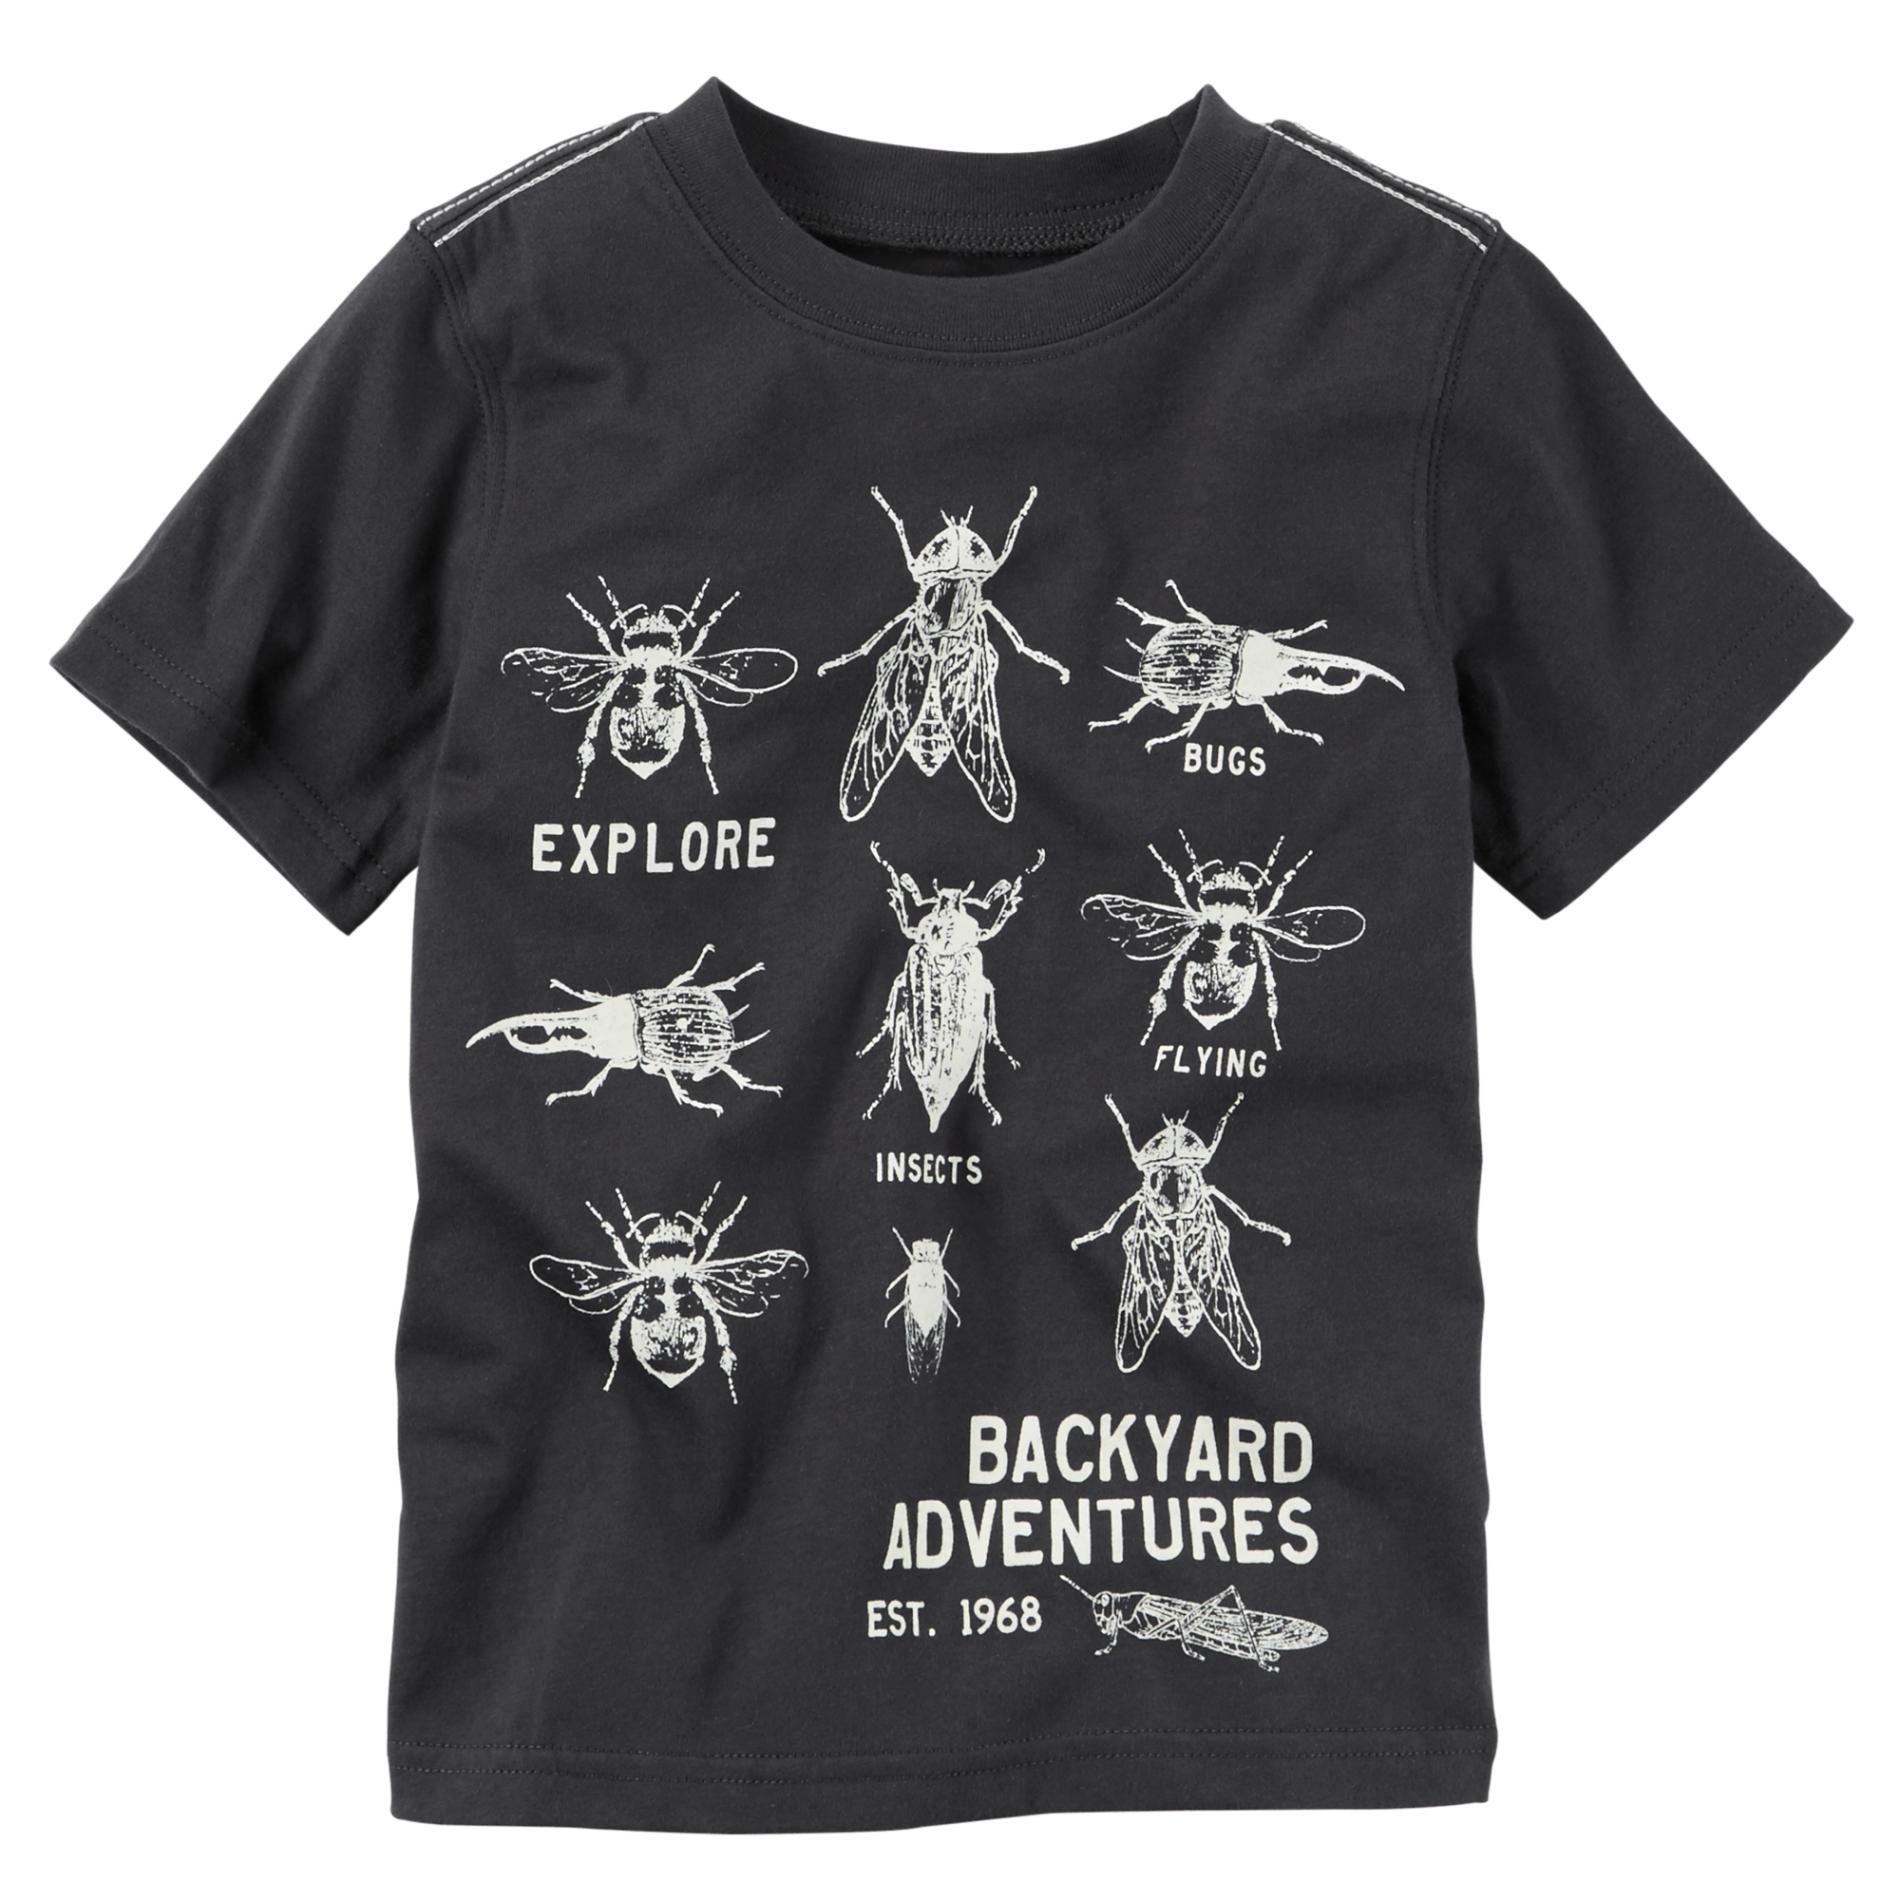 Carter's Toddler Boy's Glow-In-The-Dark Graphic T-Shirt - Bugs